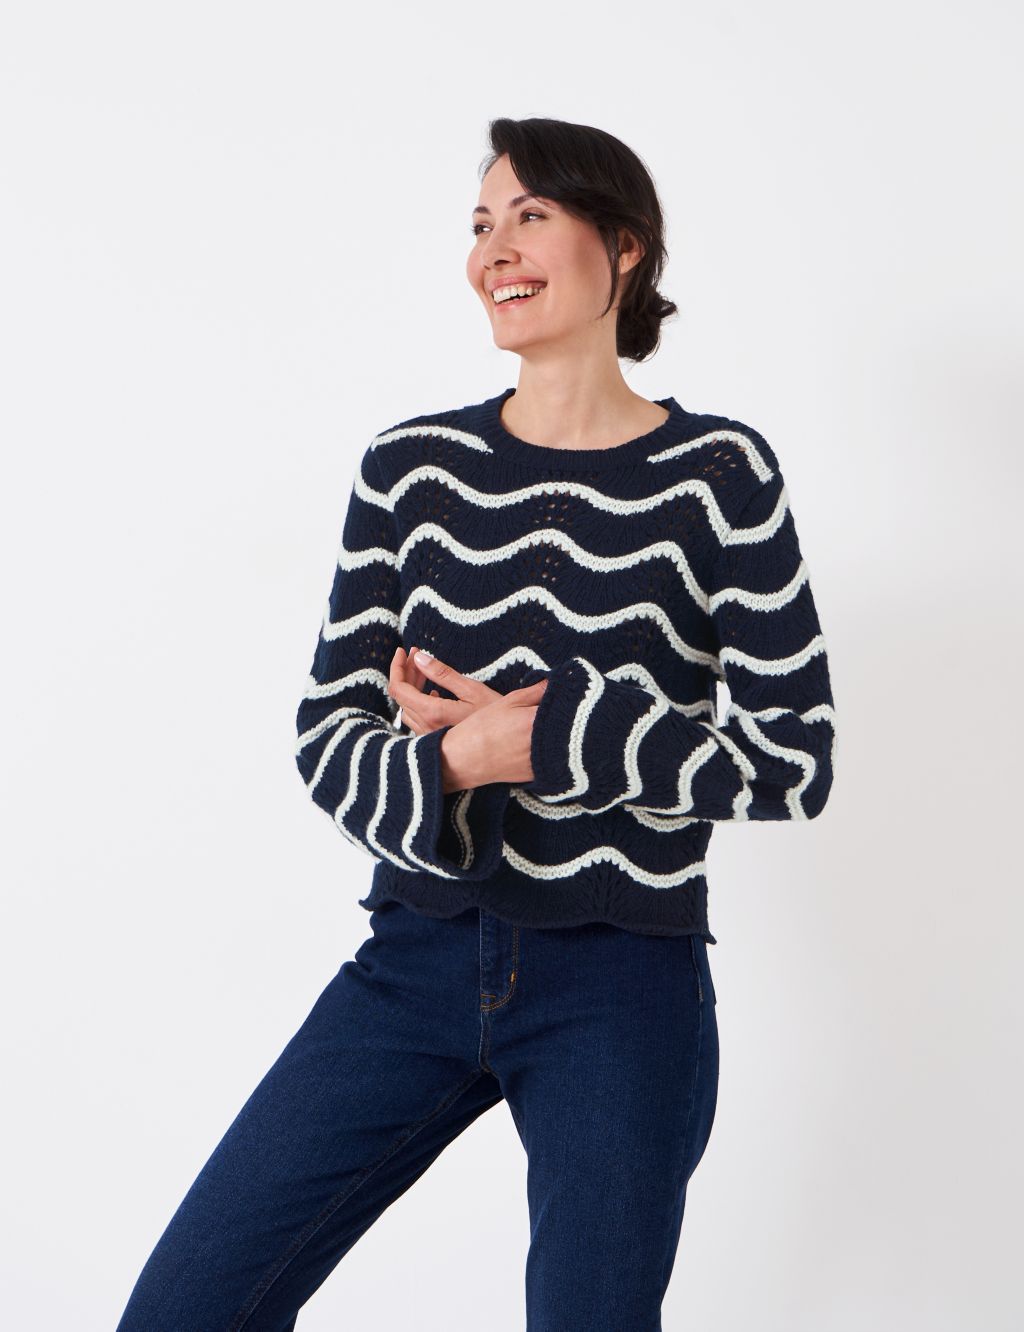 Lambswool Rich Striped Crew Neck Jumper image 1